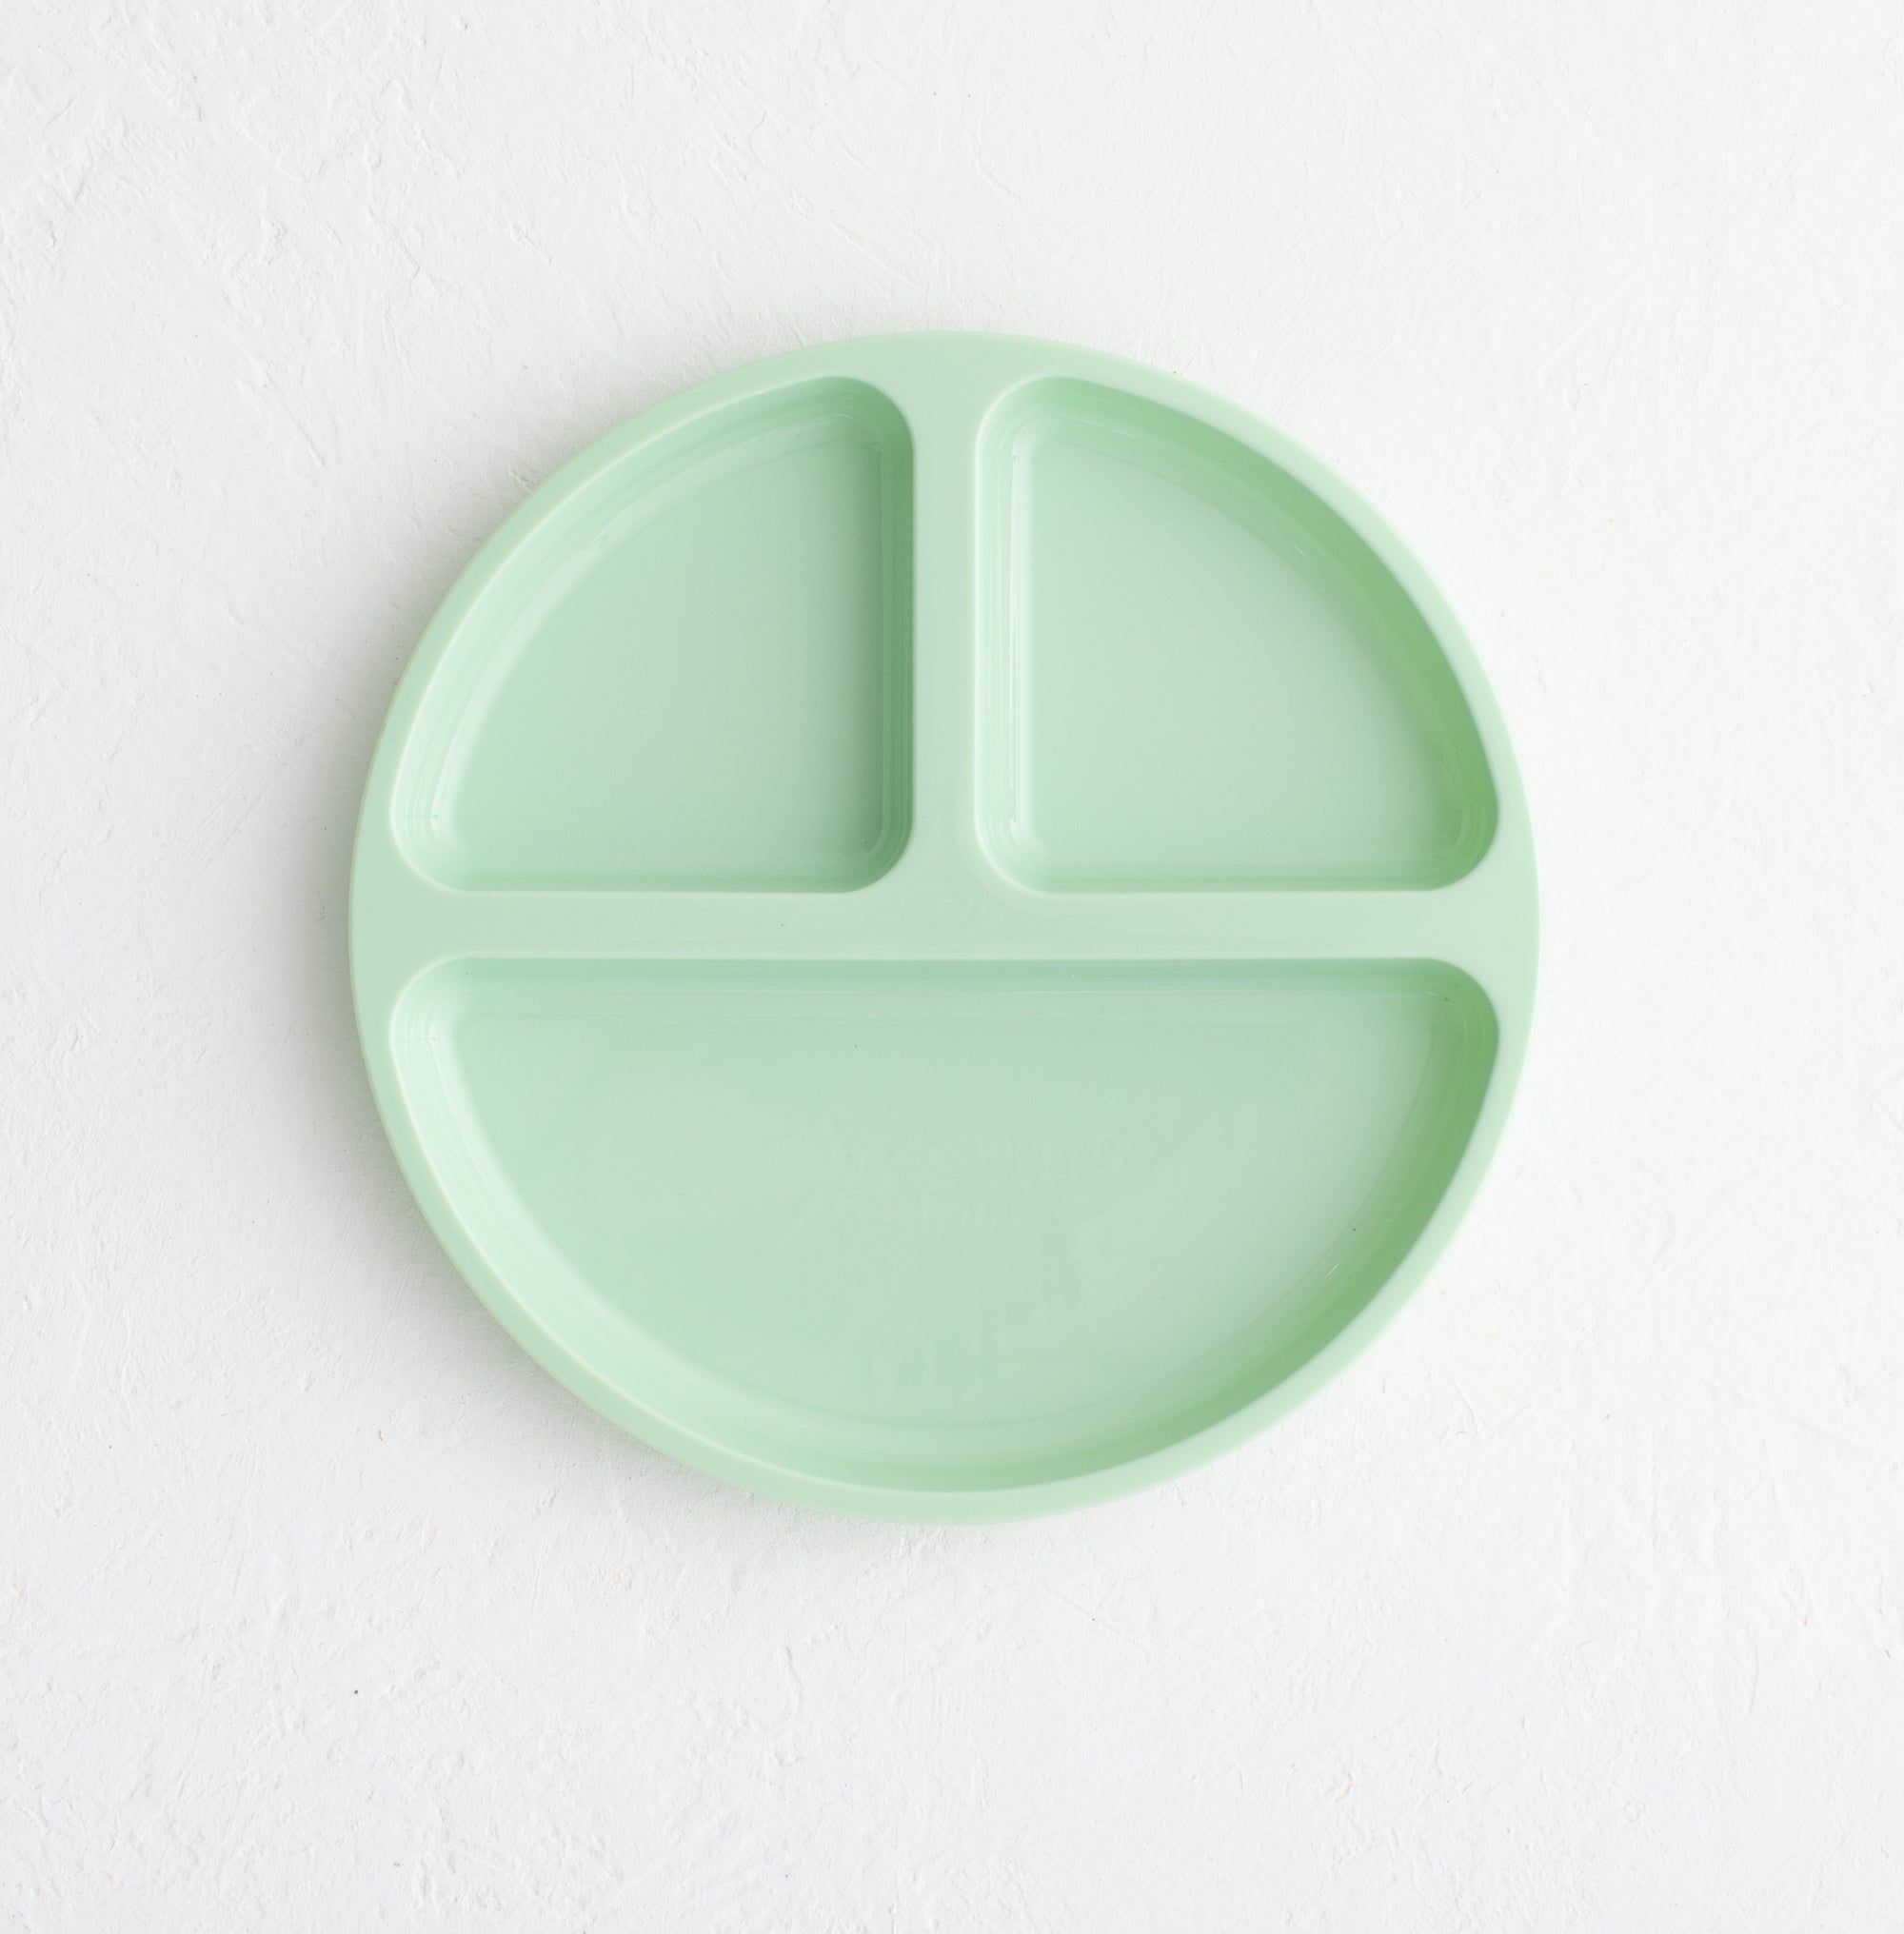 Recycled Plastic Divided Plate for Toddlers from Nestor Avenue - green